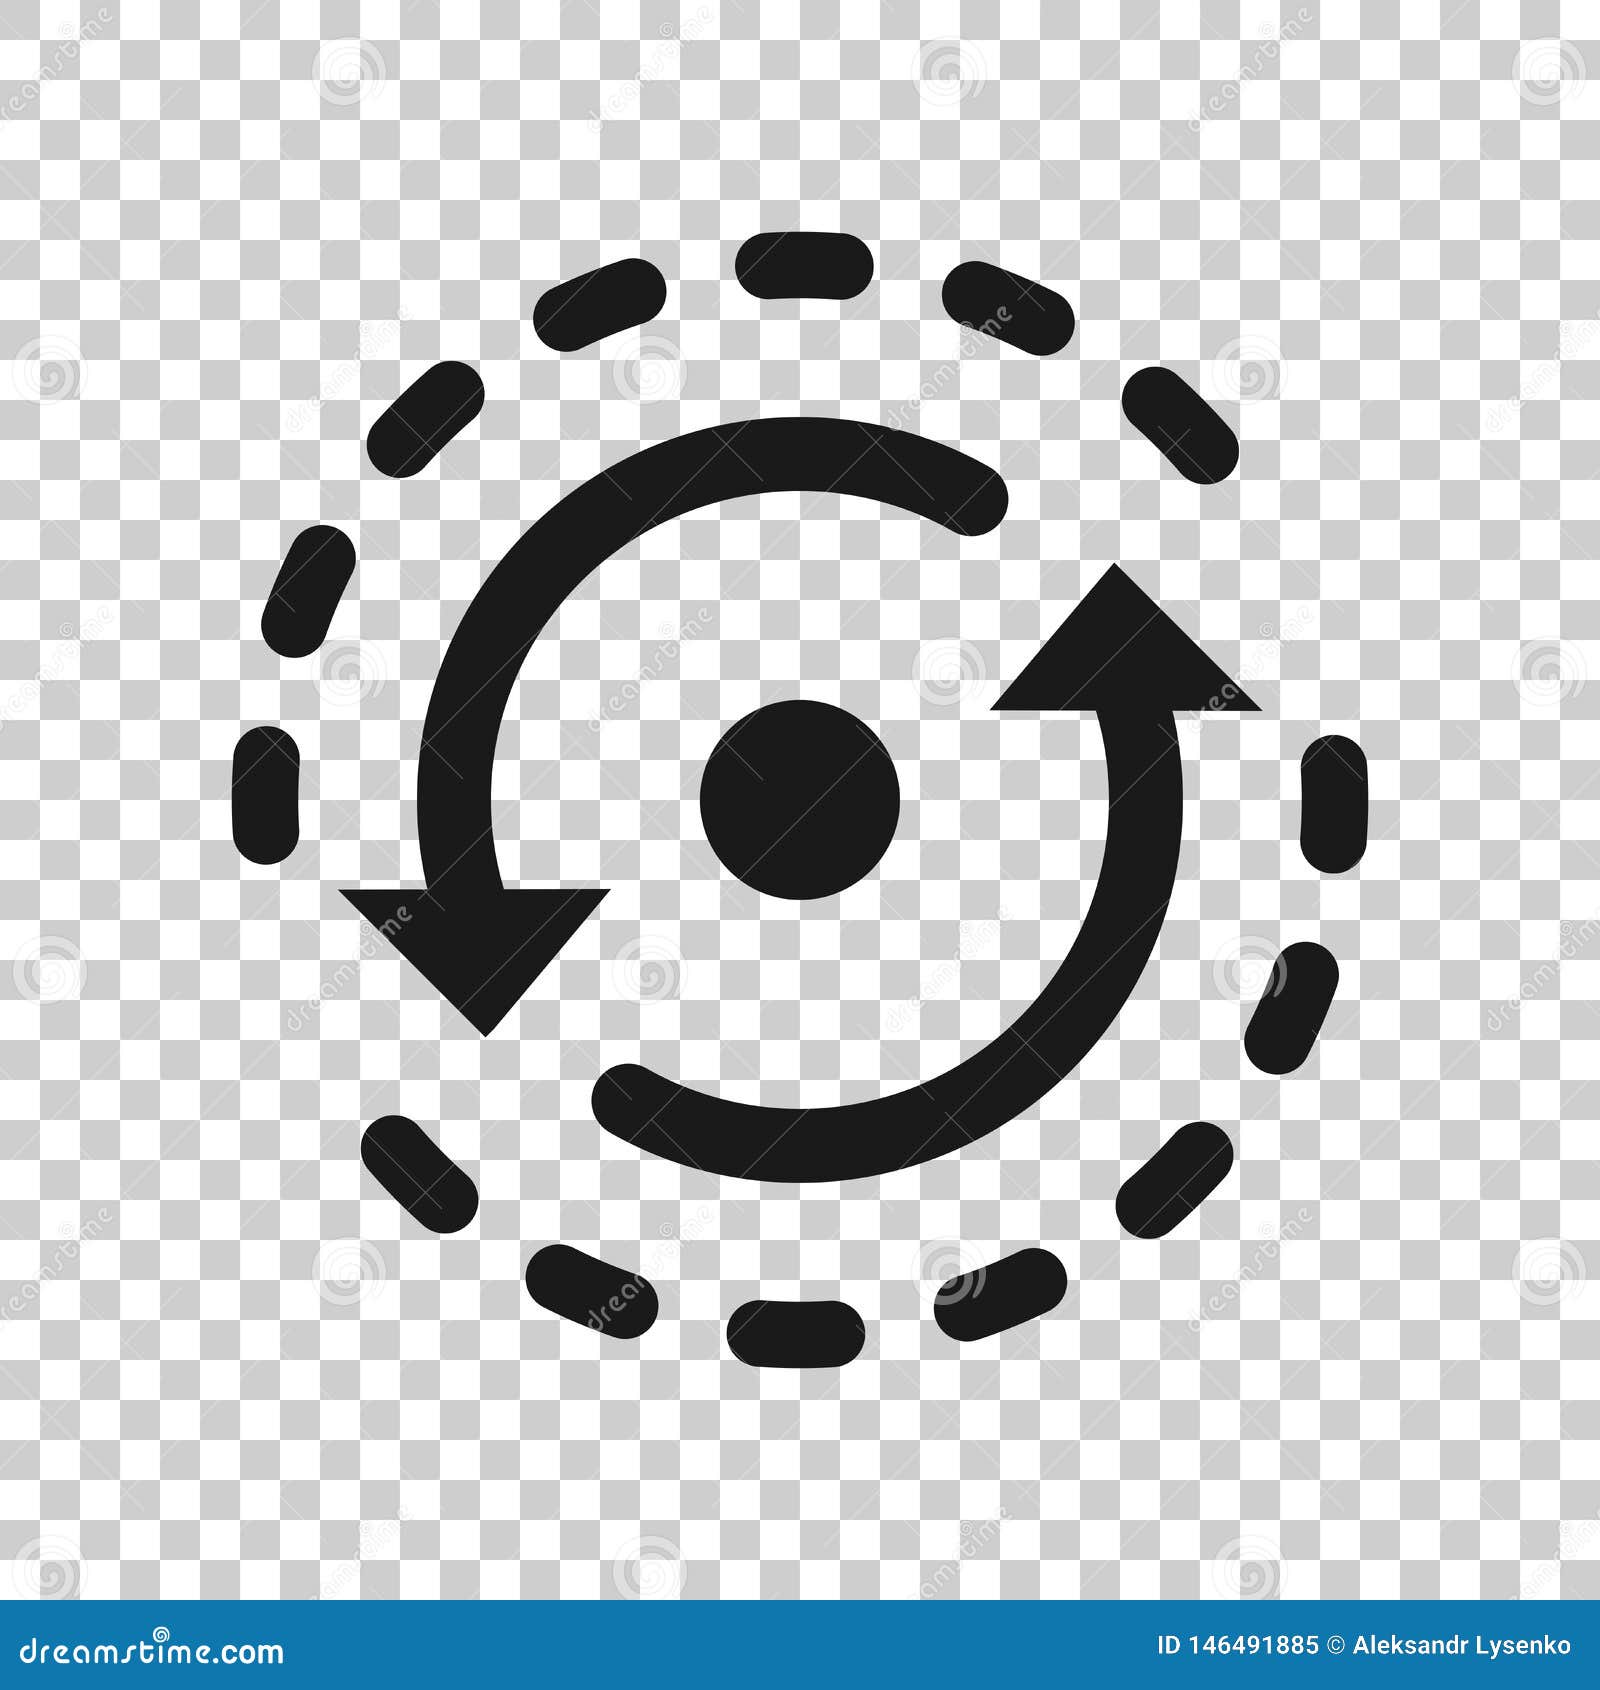 oval with arrows icon in transparent style. consistency repeat   on  background. reload rotation